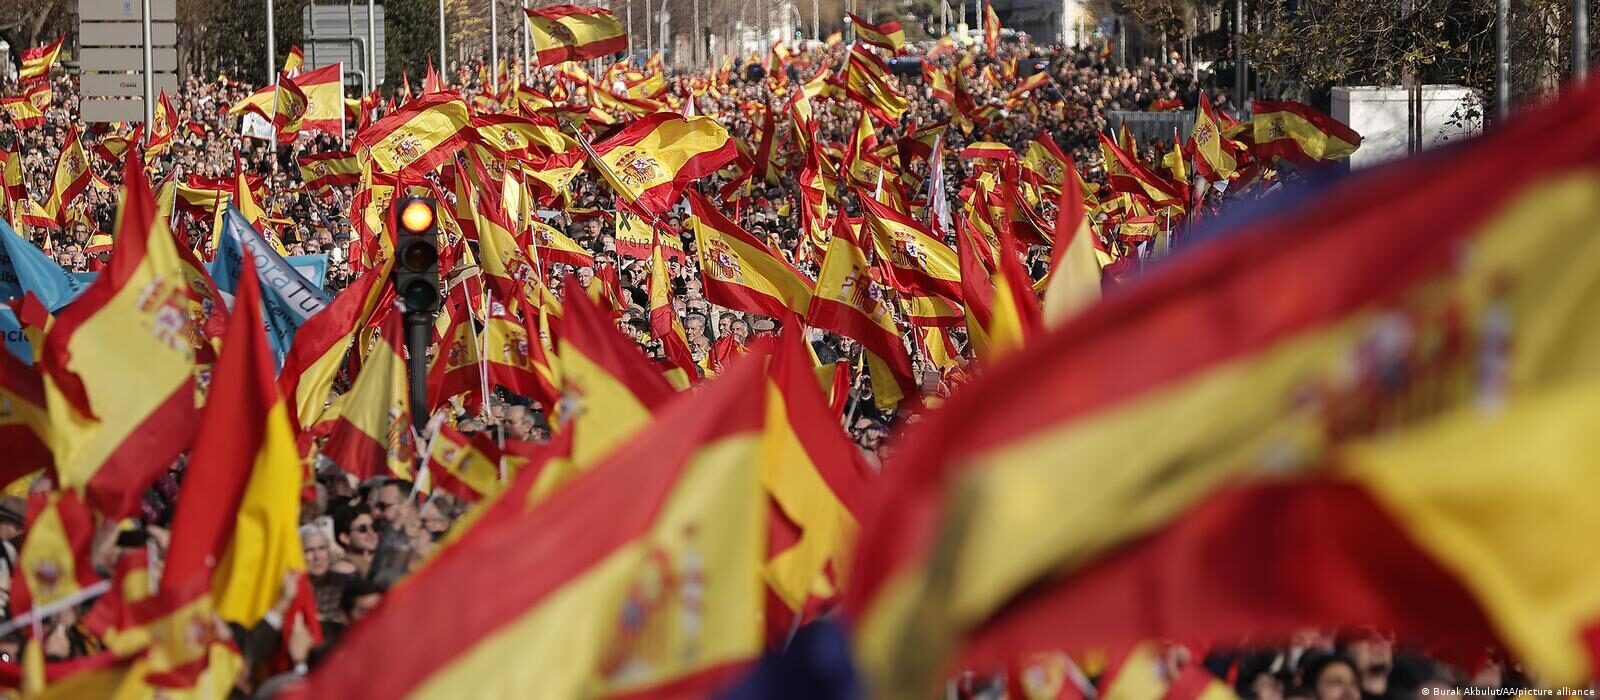 At least 100,000 anti-government protesters rally in Madrid, Spain